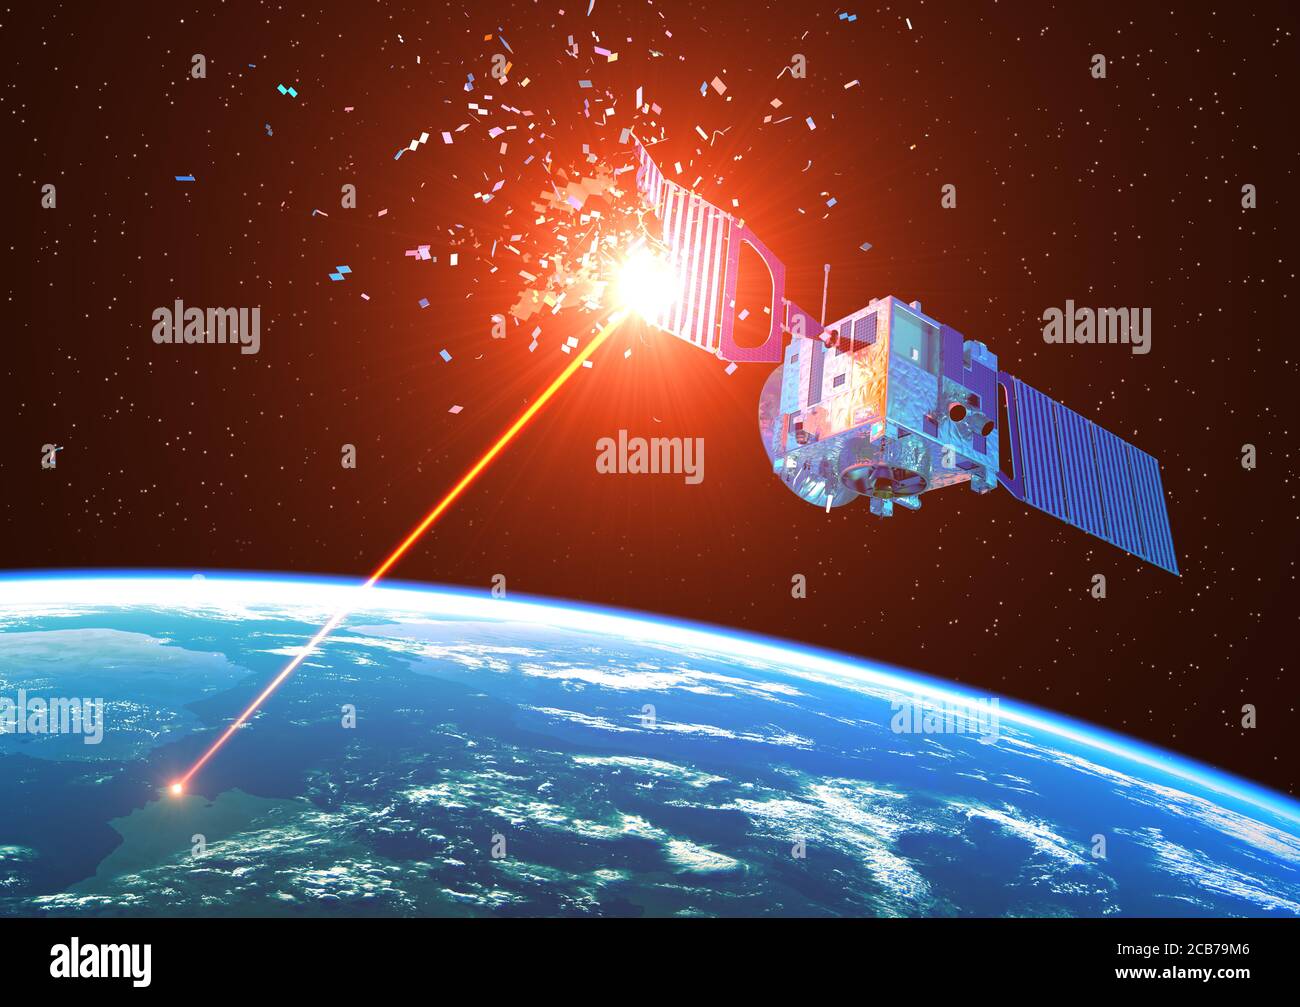 Laser Weapon From Earth Destroys Satellite In Space. 3D Illustration. Stock Photo